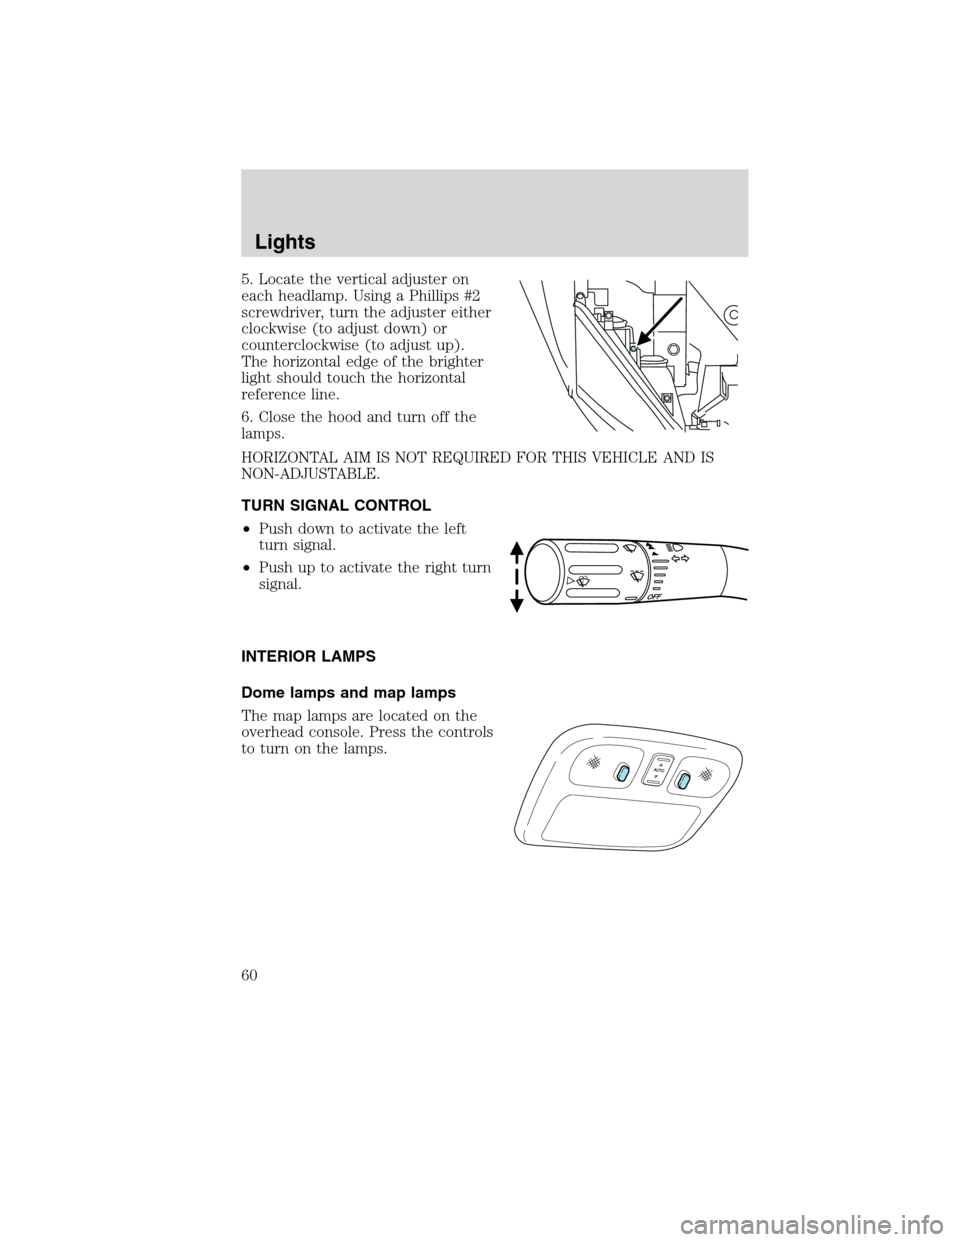 Mercury Milan 2010  Owners Manuals 5. Locate the vertical adjuster on
each headlamp. Using a Phillips #2
screwdriver, turn the adjuster either
clockwise (to adjust down) or
counterclockwise (to adjust up).
The horizontal edge of the br